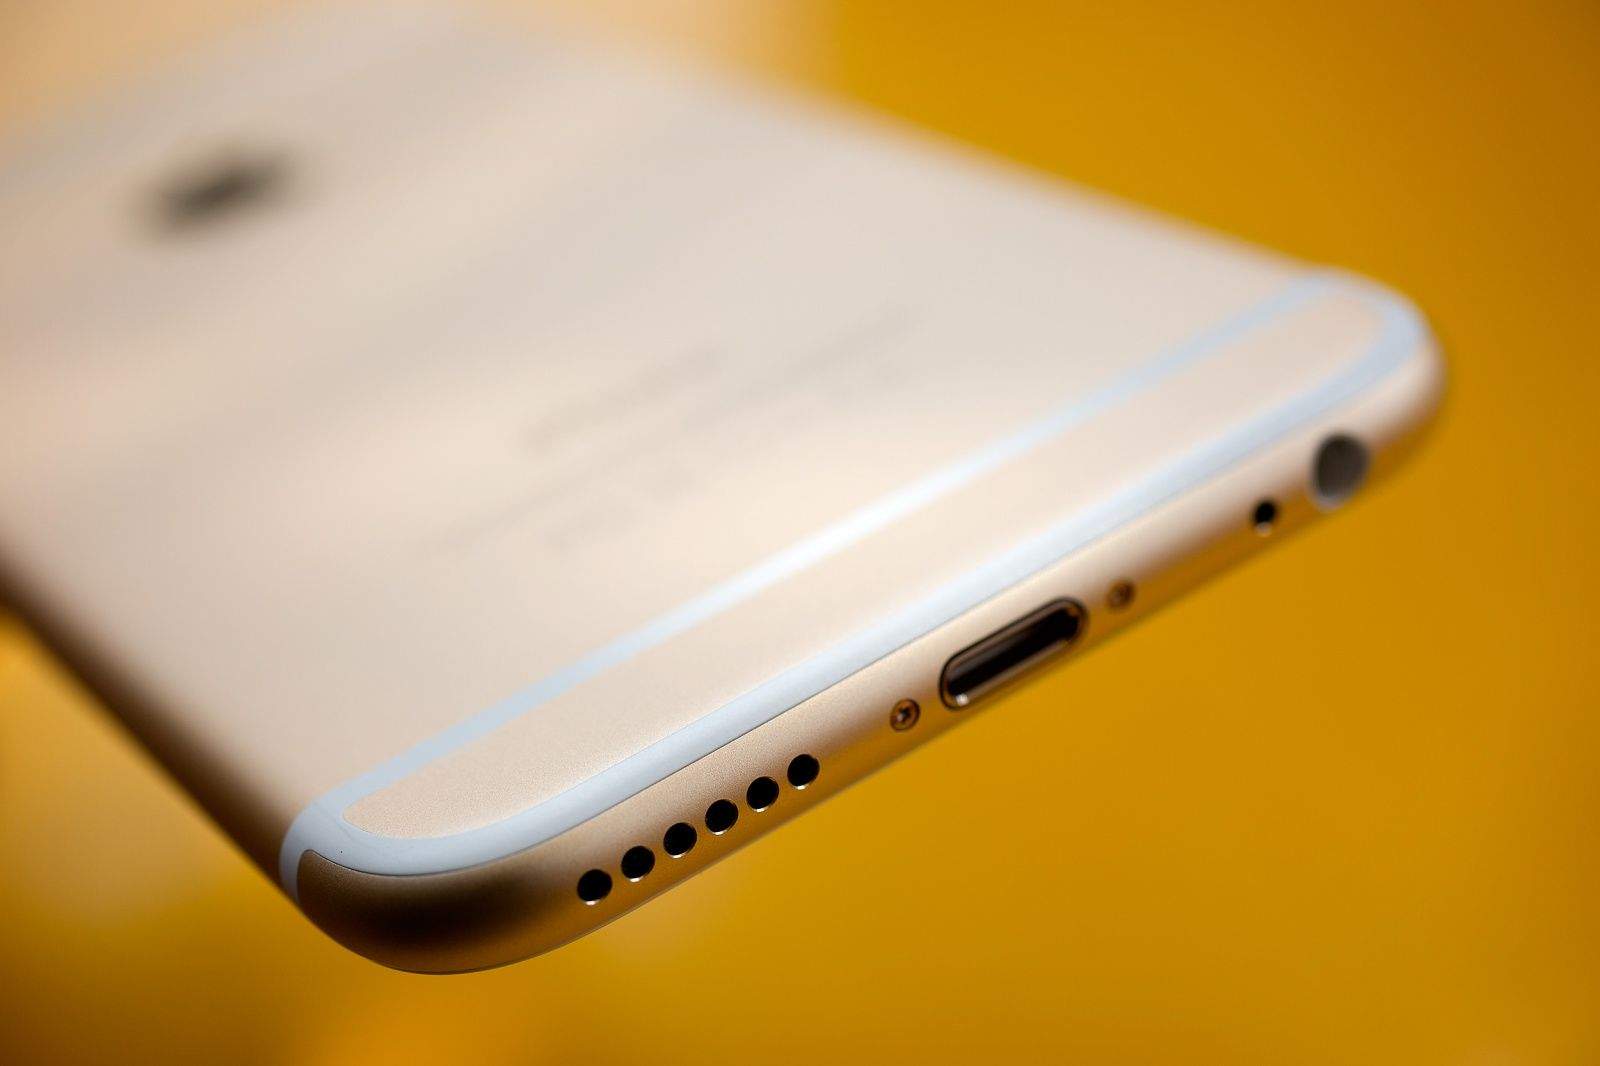 The iPhone 6 is big. And not just in terms of size, either.